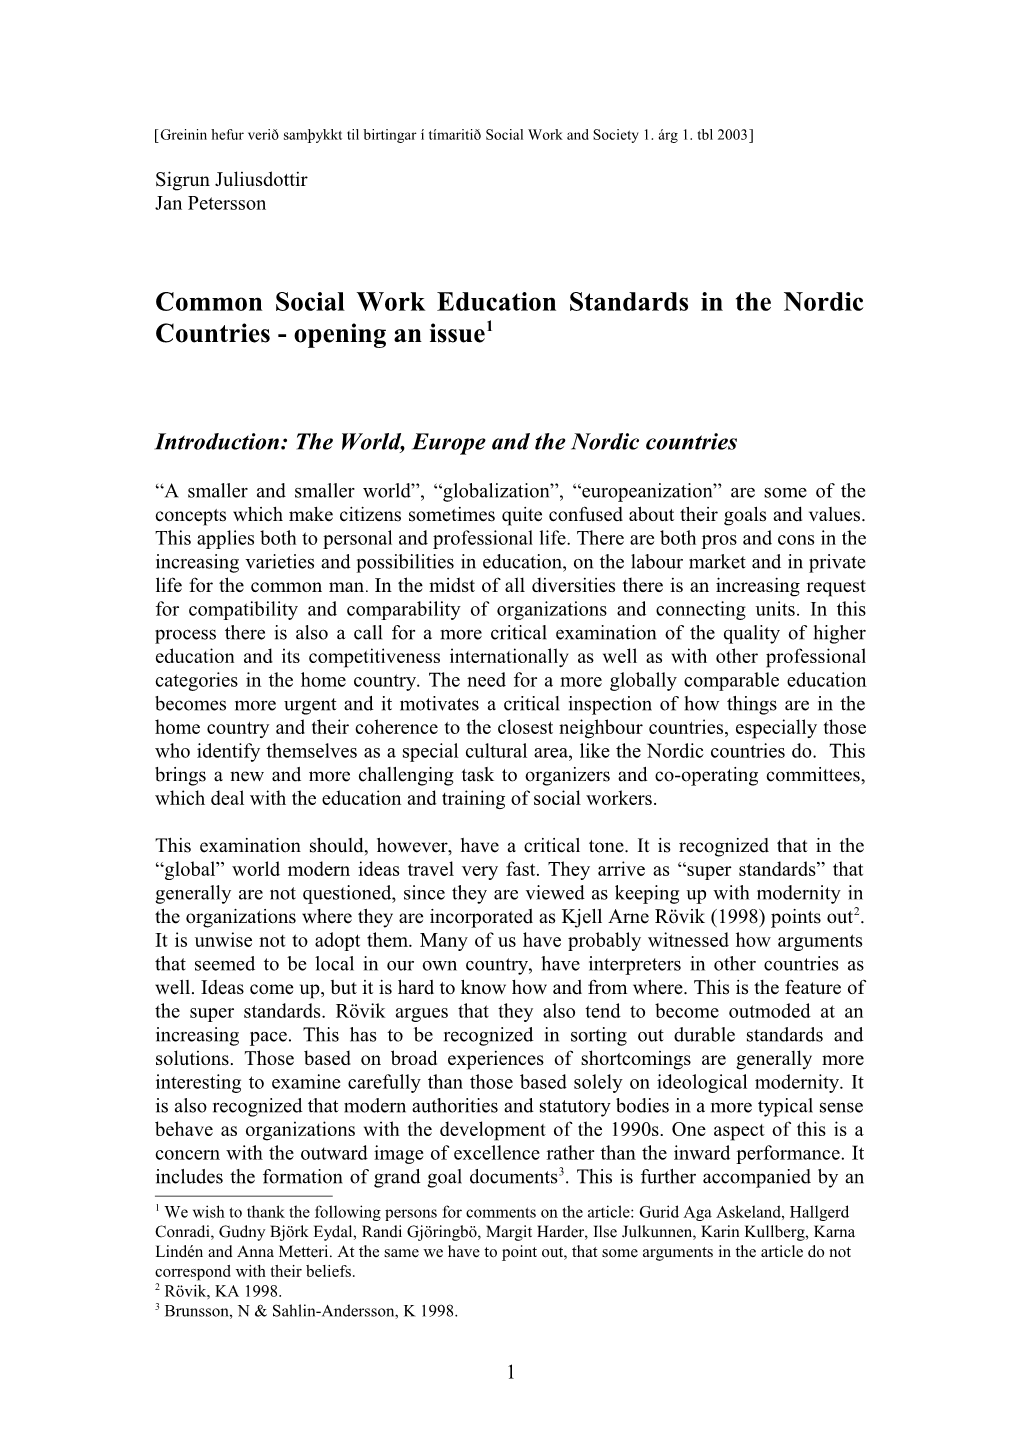 Social Work Education in the Nordic Countries Are Standards Needed